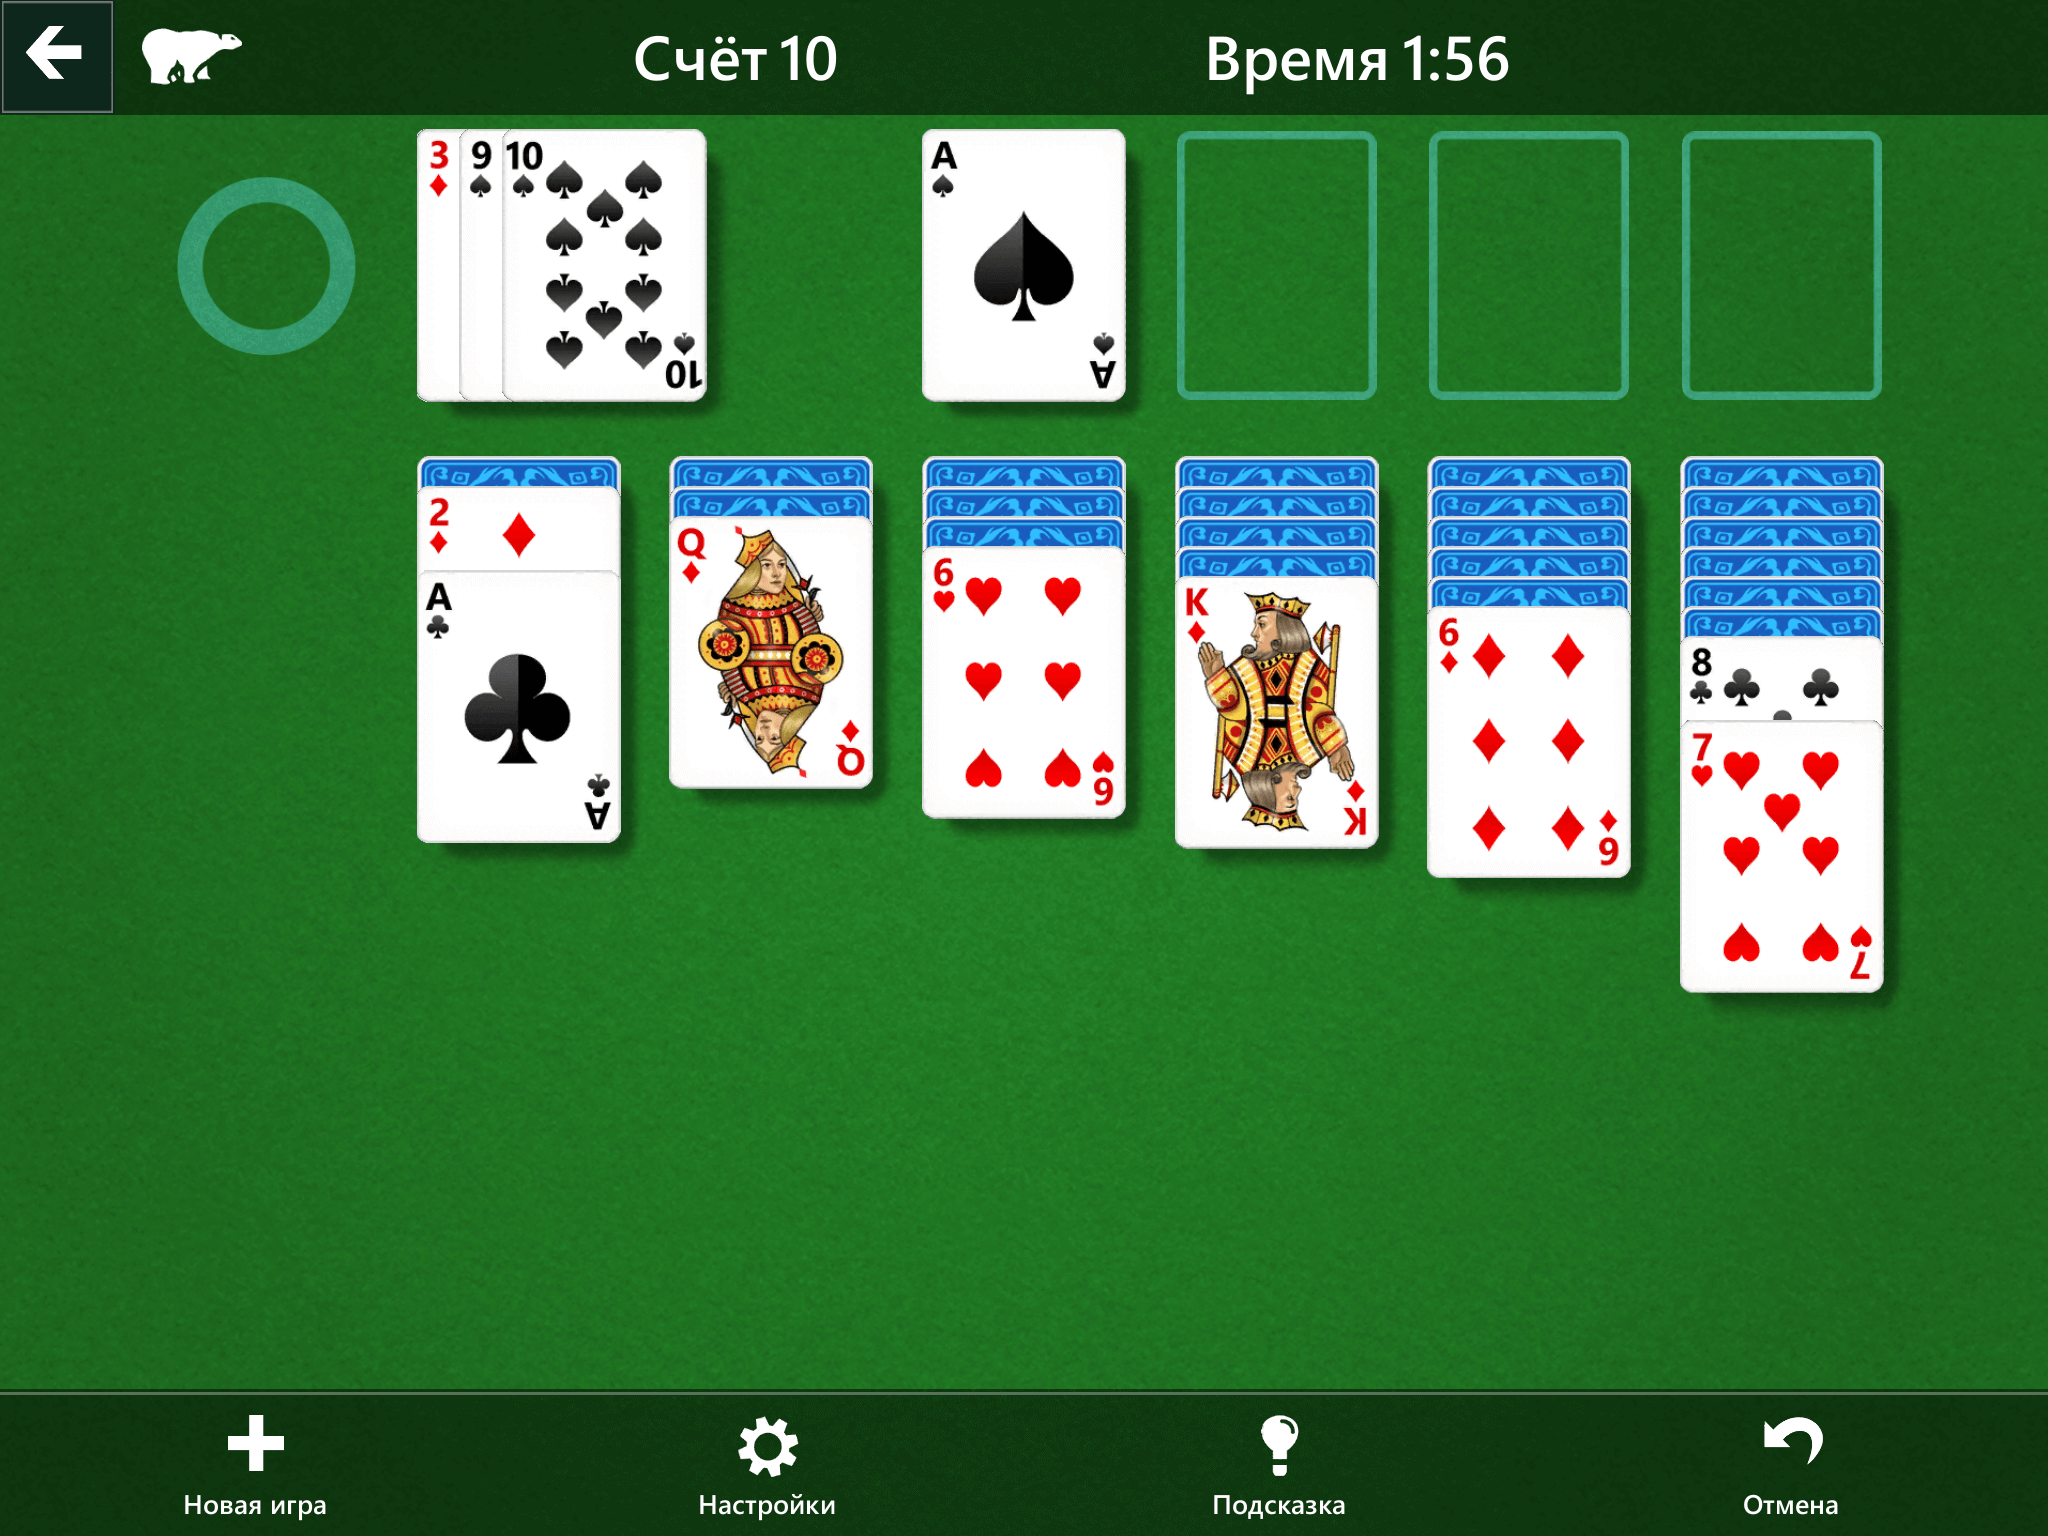 how to download new version of free microsoft solitaire collection